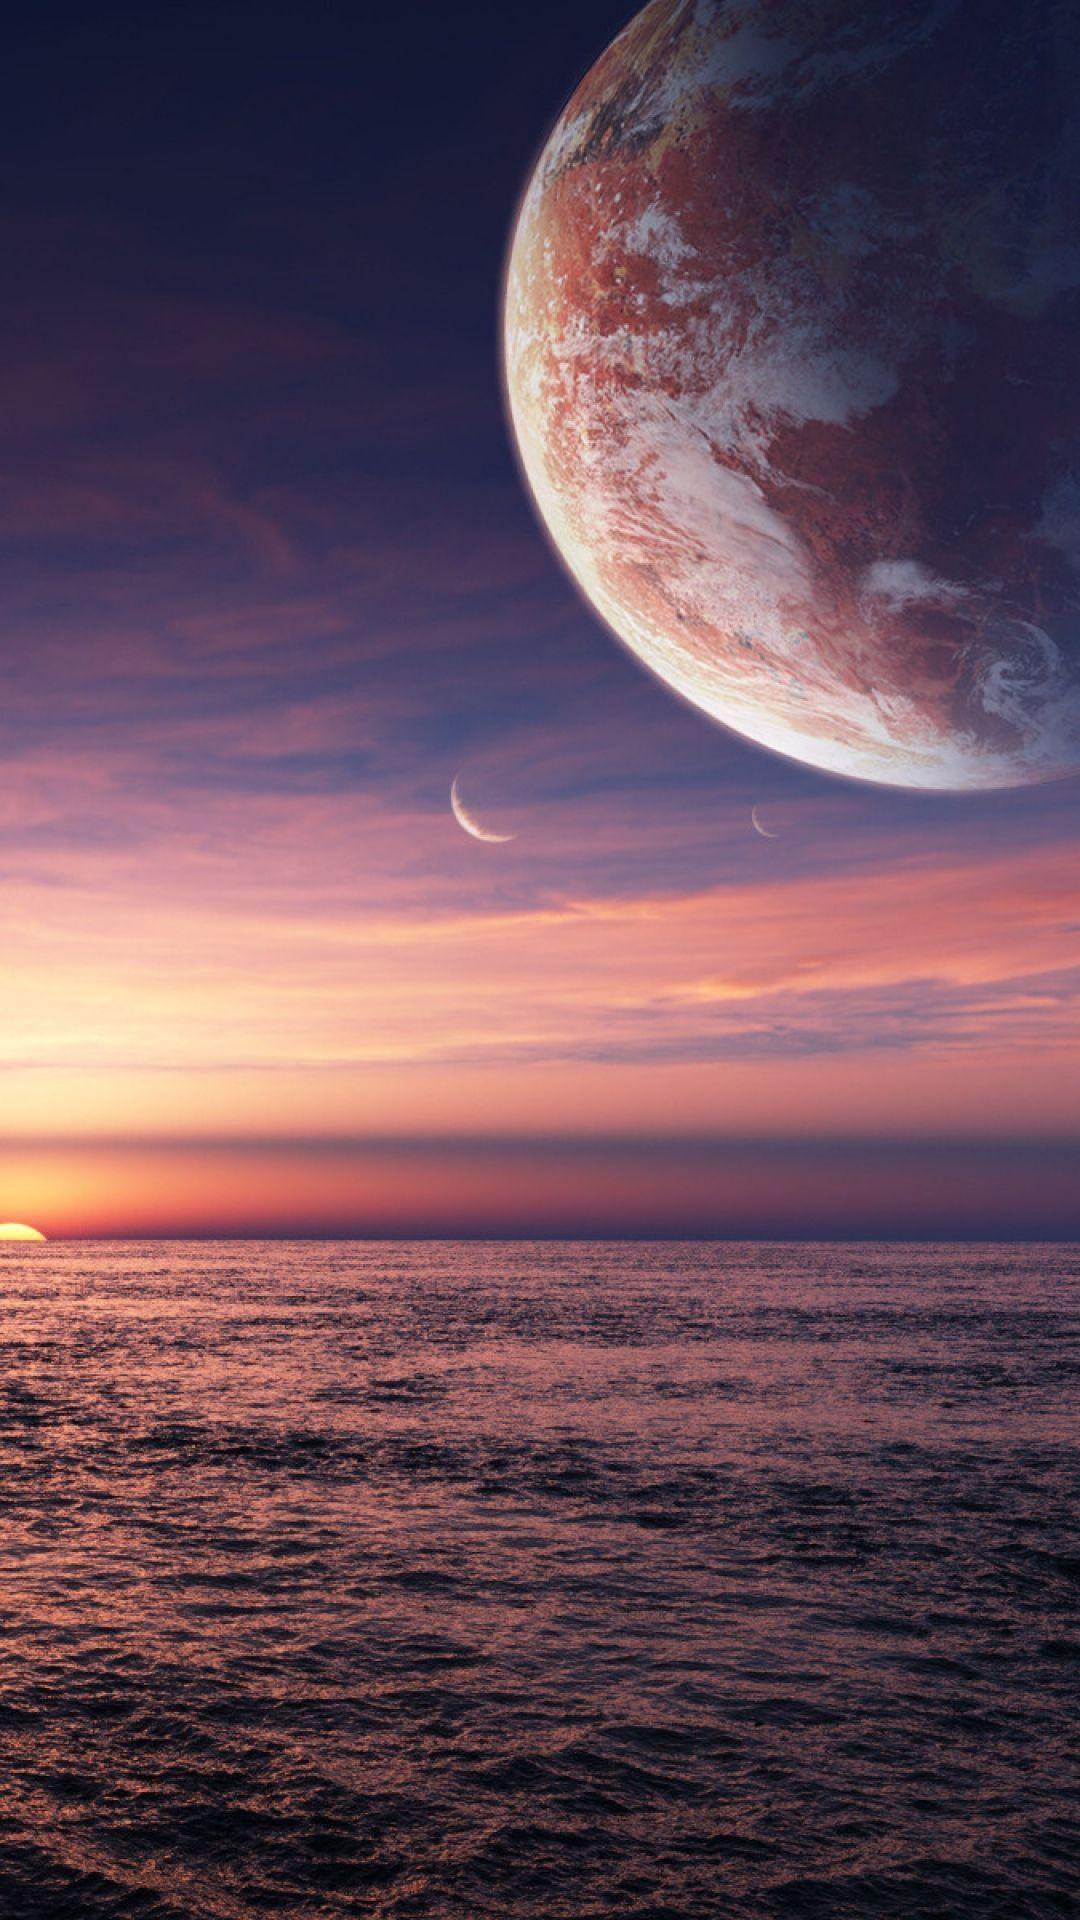 HD Wallpaper 1080x1920. Heavens. Planets, Moon and Sunset